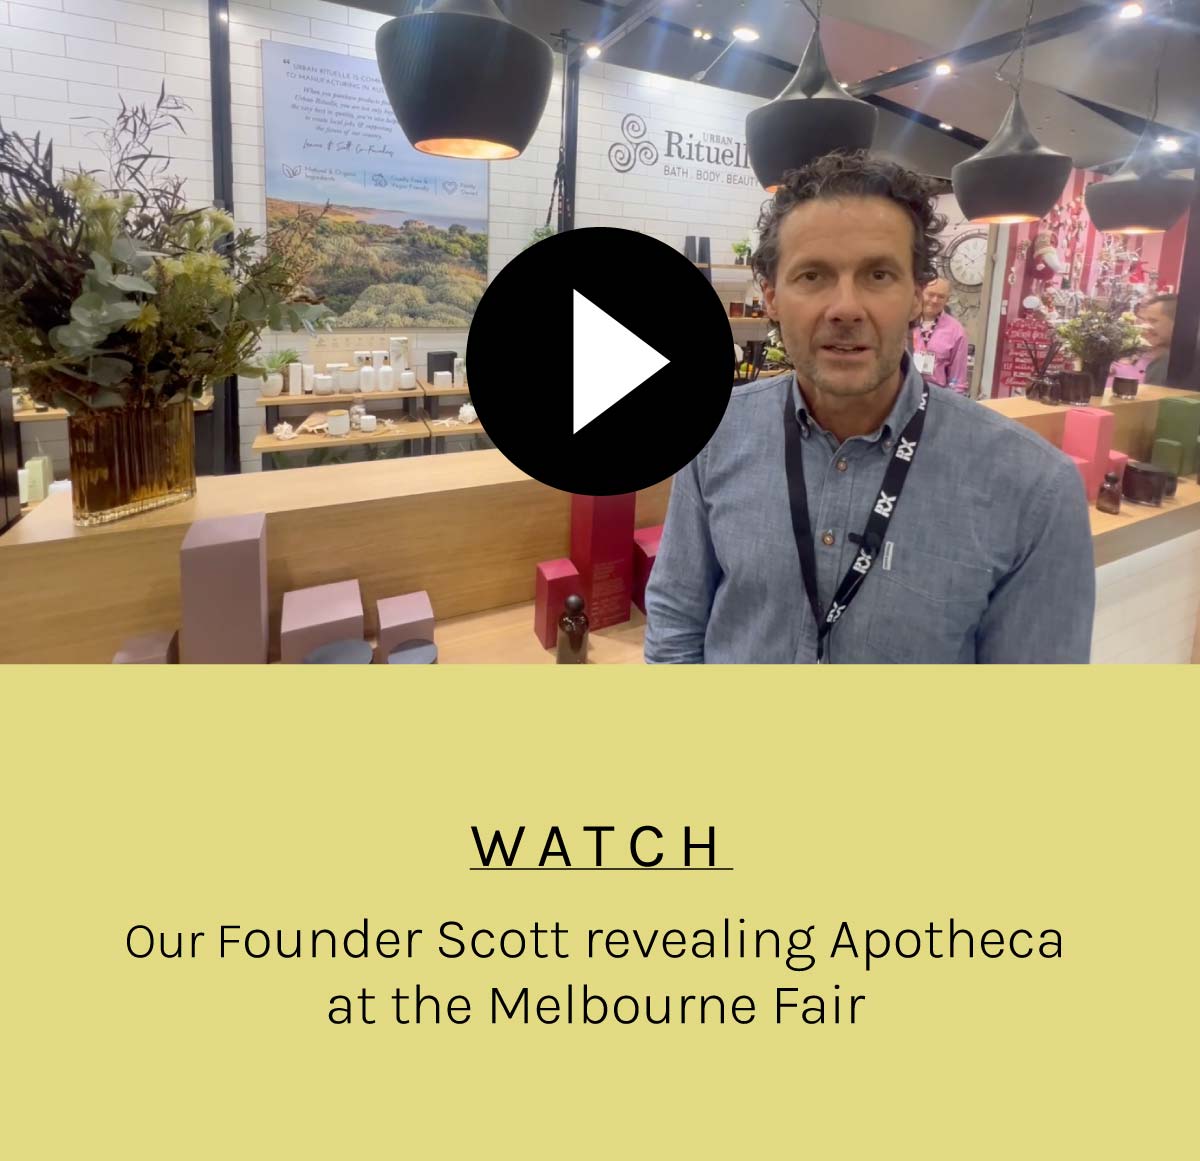 WATCH Our Founder Scott revealing Apotheca at the Melbourne Fair